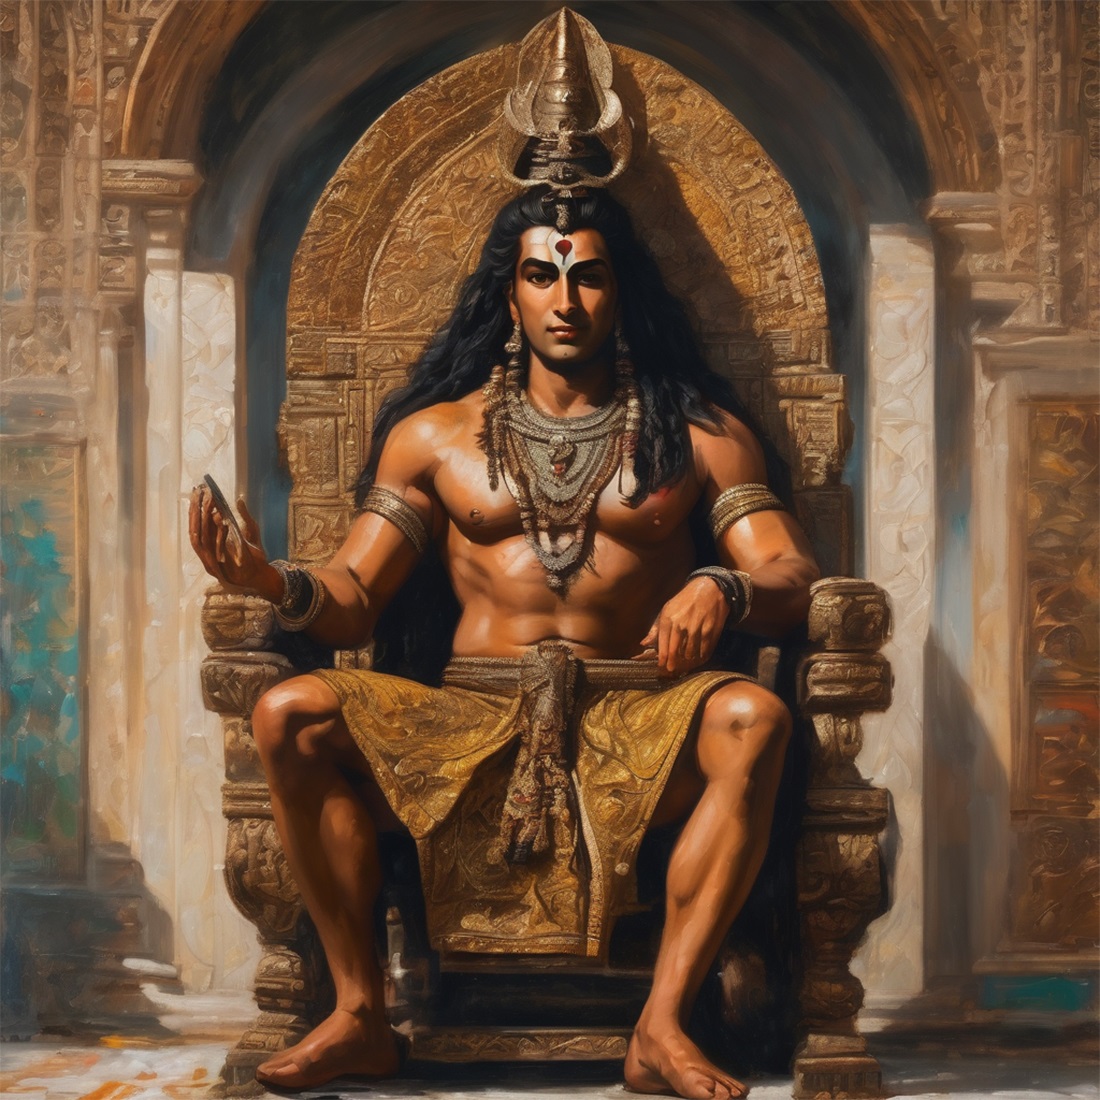 Shiva sitting on stone chair oil painting preview image.